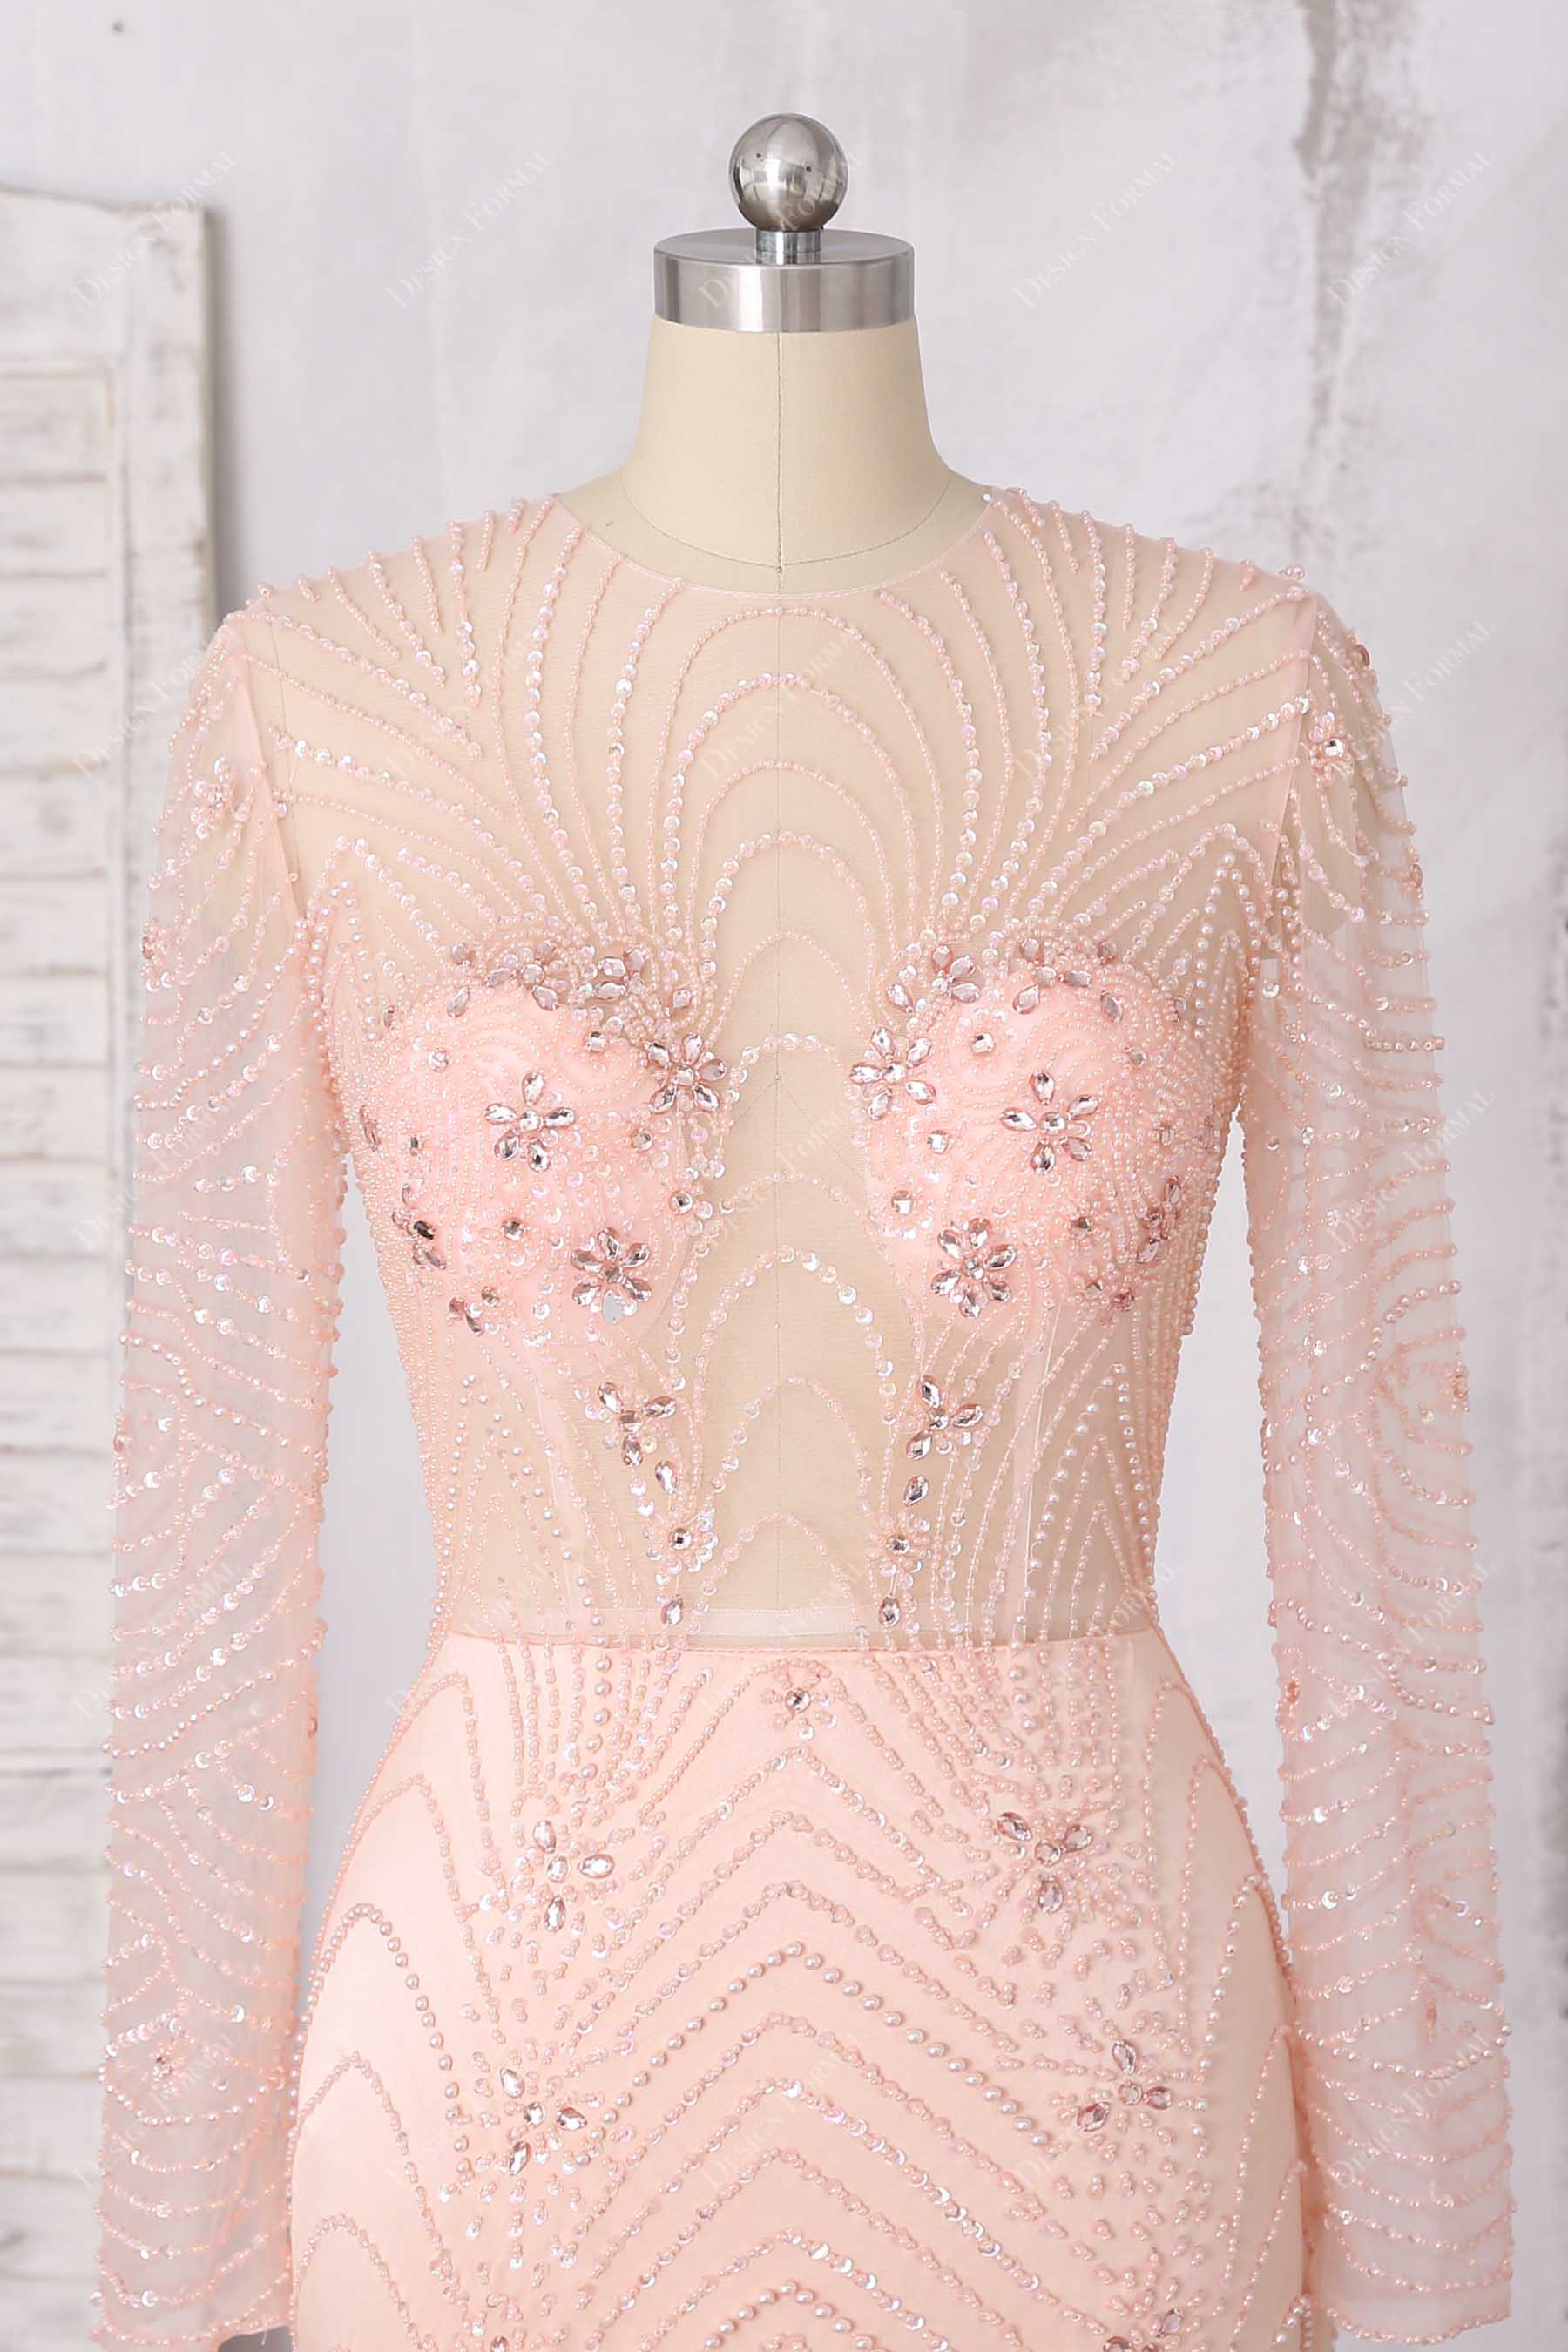 sheer bodice peach pink sewing beads